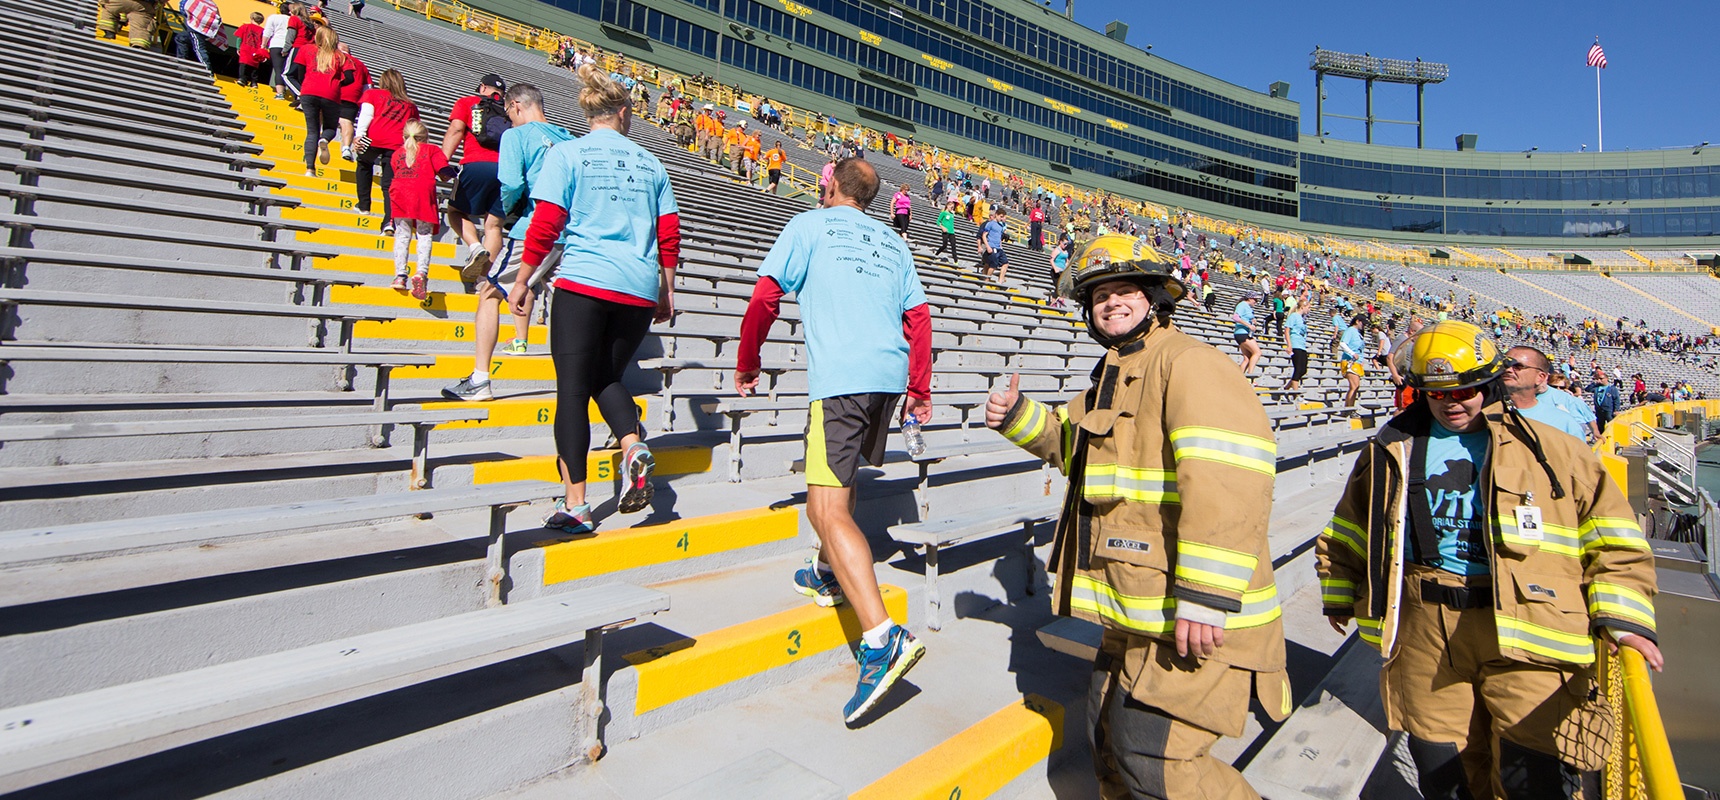 Pierce-Manufacturing,-Green-Bay-Metro-Fire-Department,-and-the-NFFF-Expand-Annual-9-11-Memorial-Stair-Climb-at-Historic-Lambeau-Field_Header.jpg